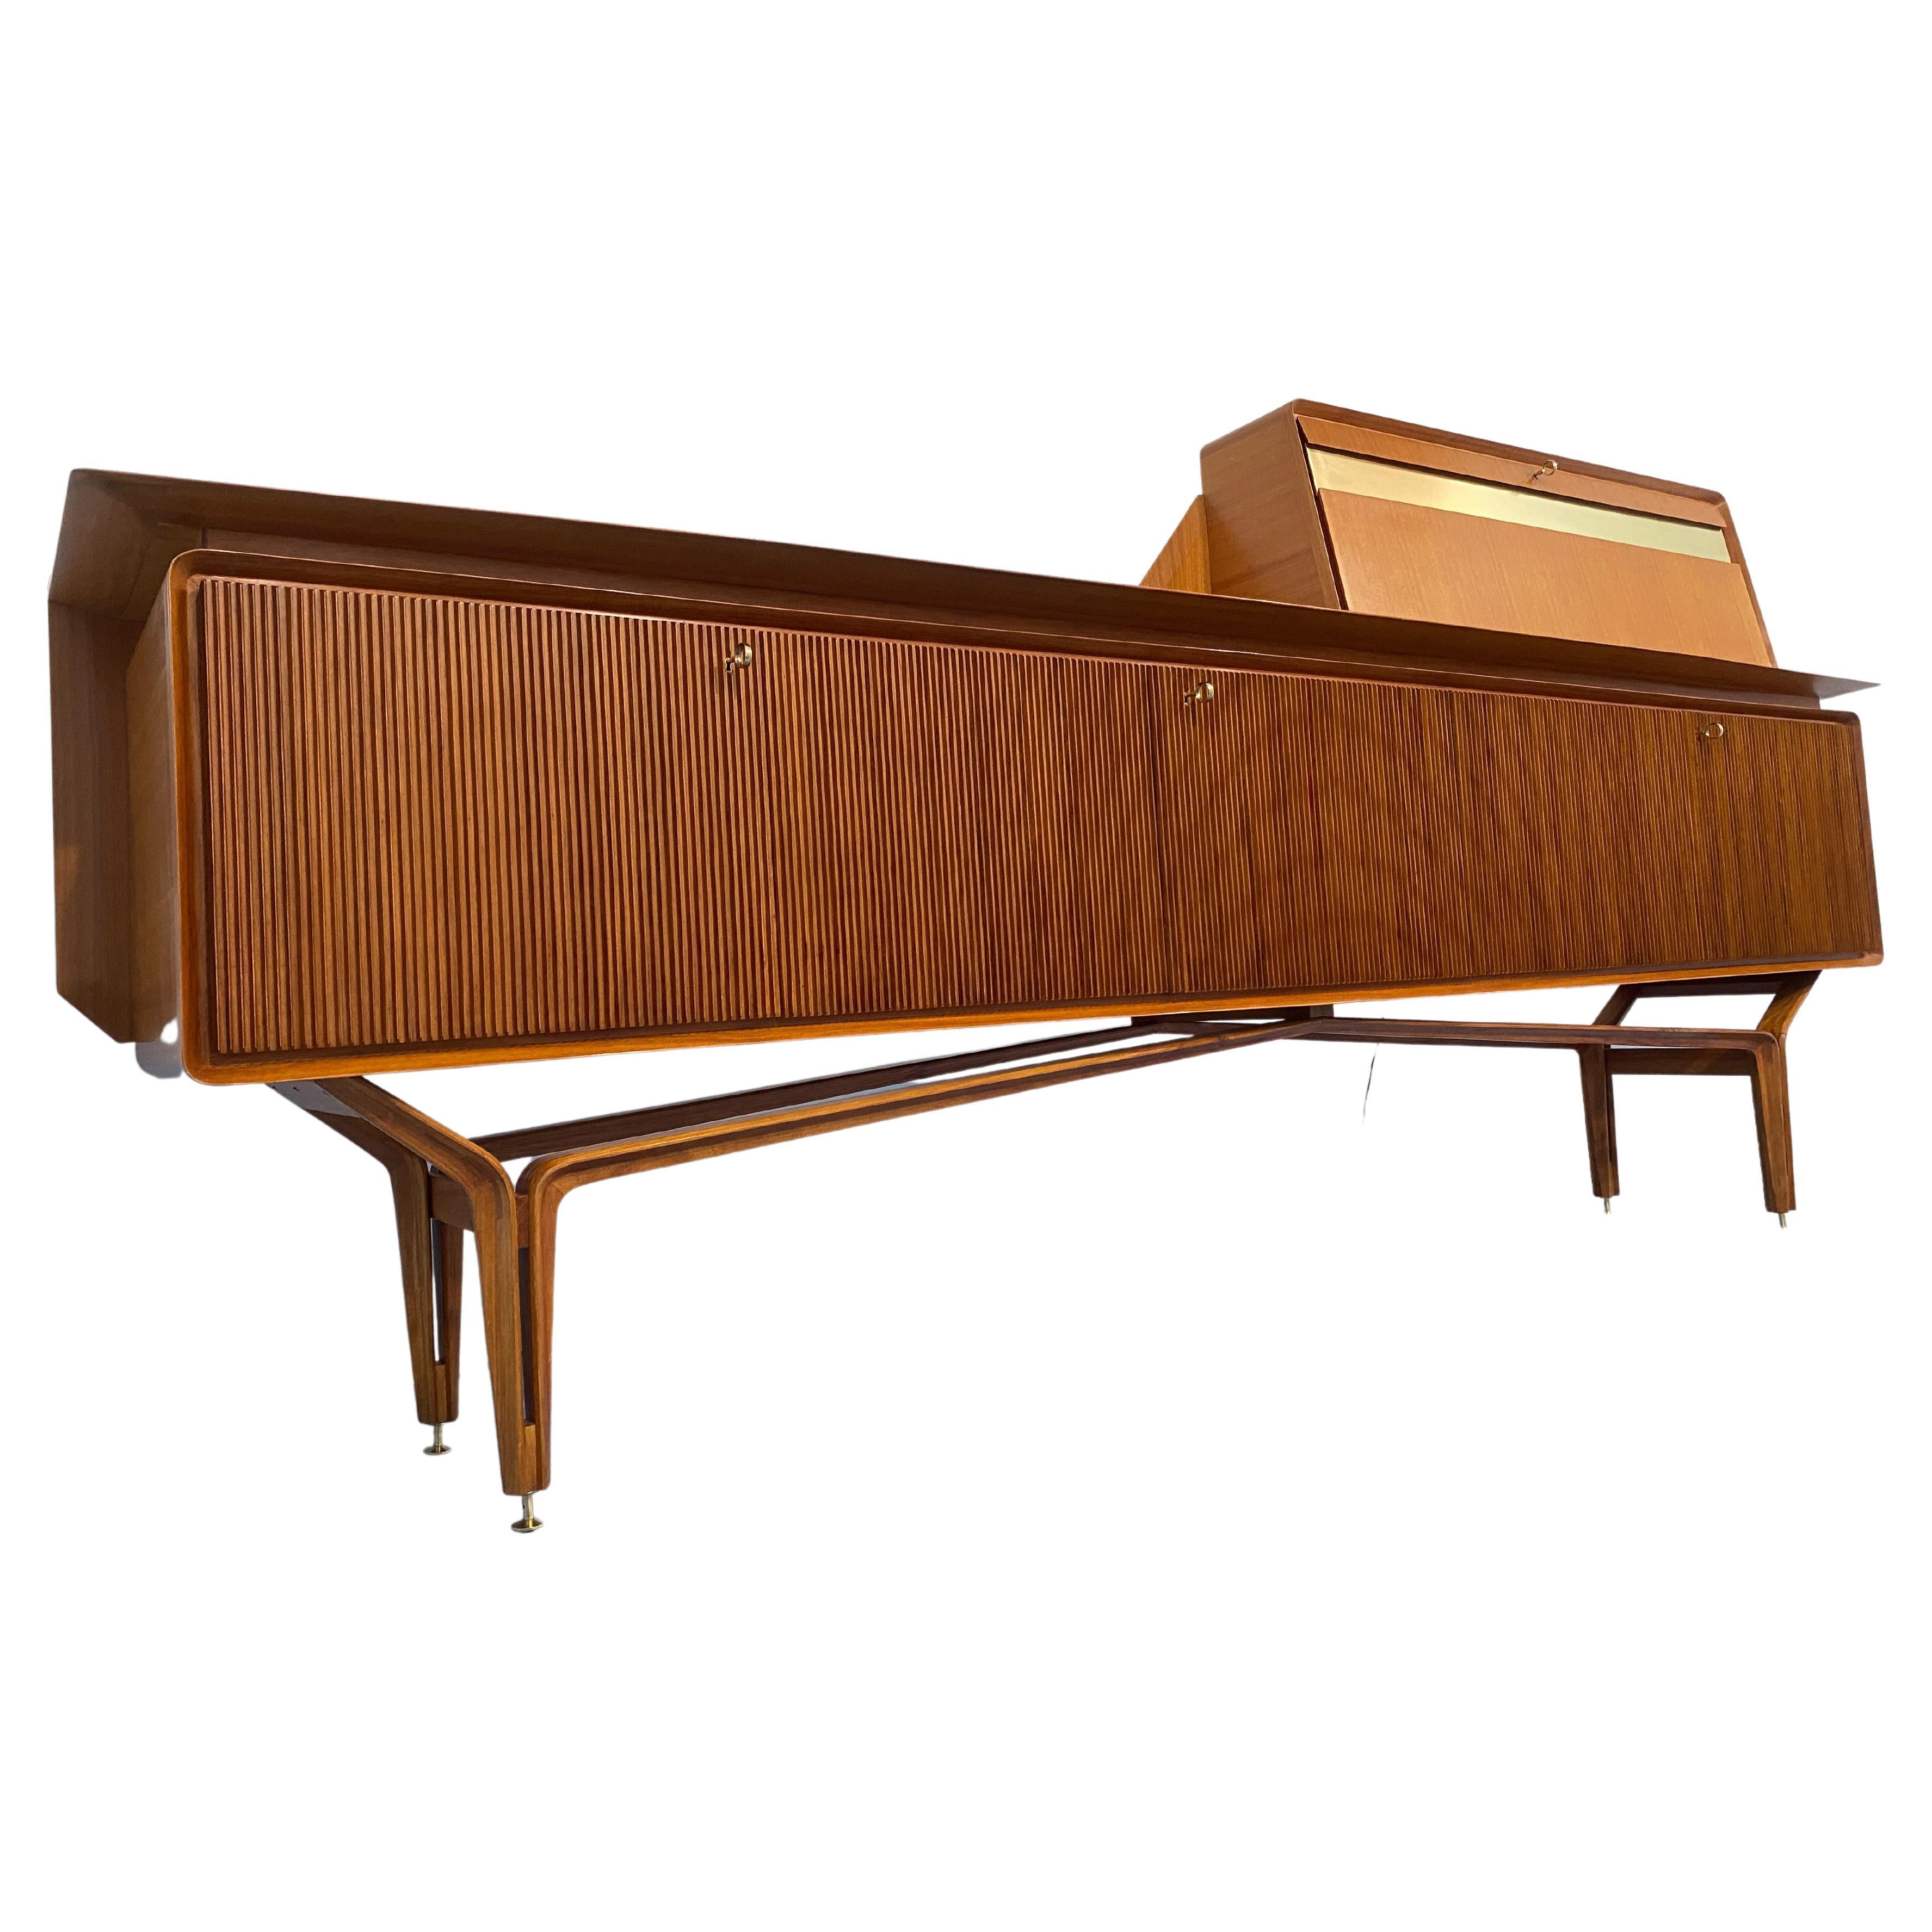 This magnificent Italian credenza from the 1960s is a stunning example of the exceptional craftsmanship produced by the Consorzio Esposizione Mobili Cantu'. Founded in 1949, the consortium aimed to bring together the best of Canturina furniture